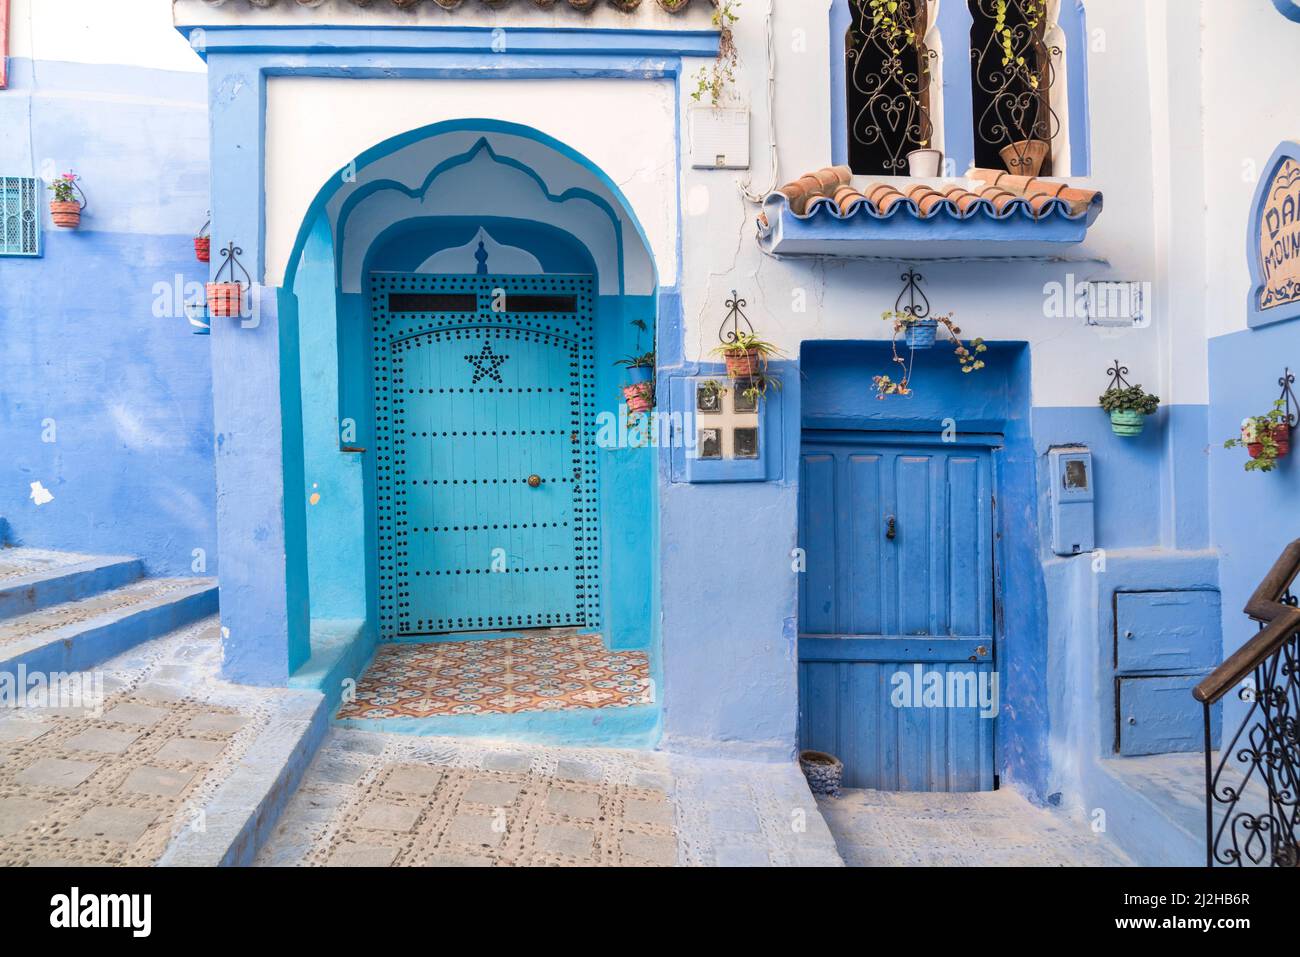 Morocco, Chefchaouen, Alley and traditional blue houses Stock Photo